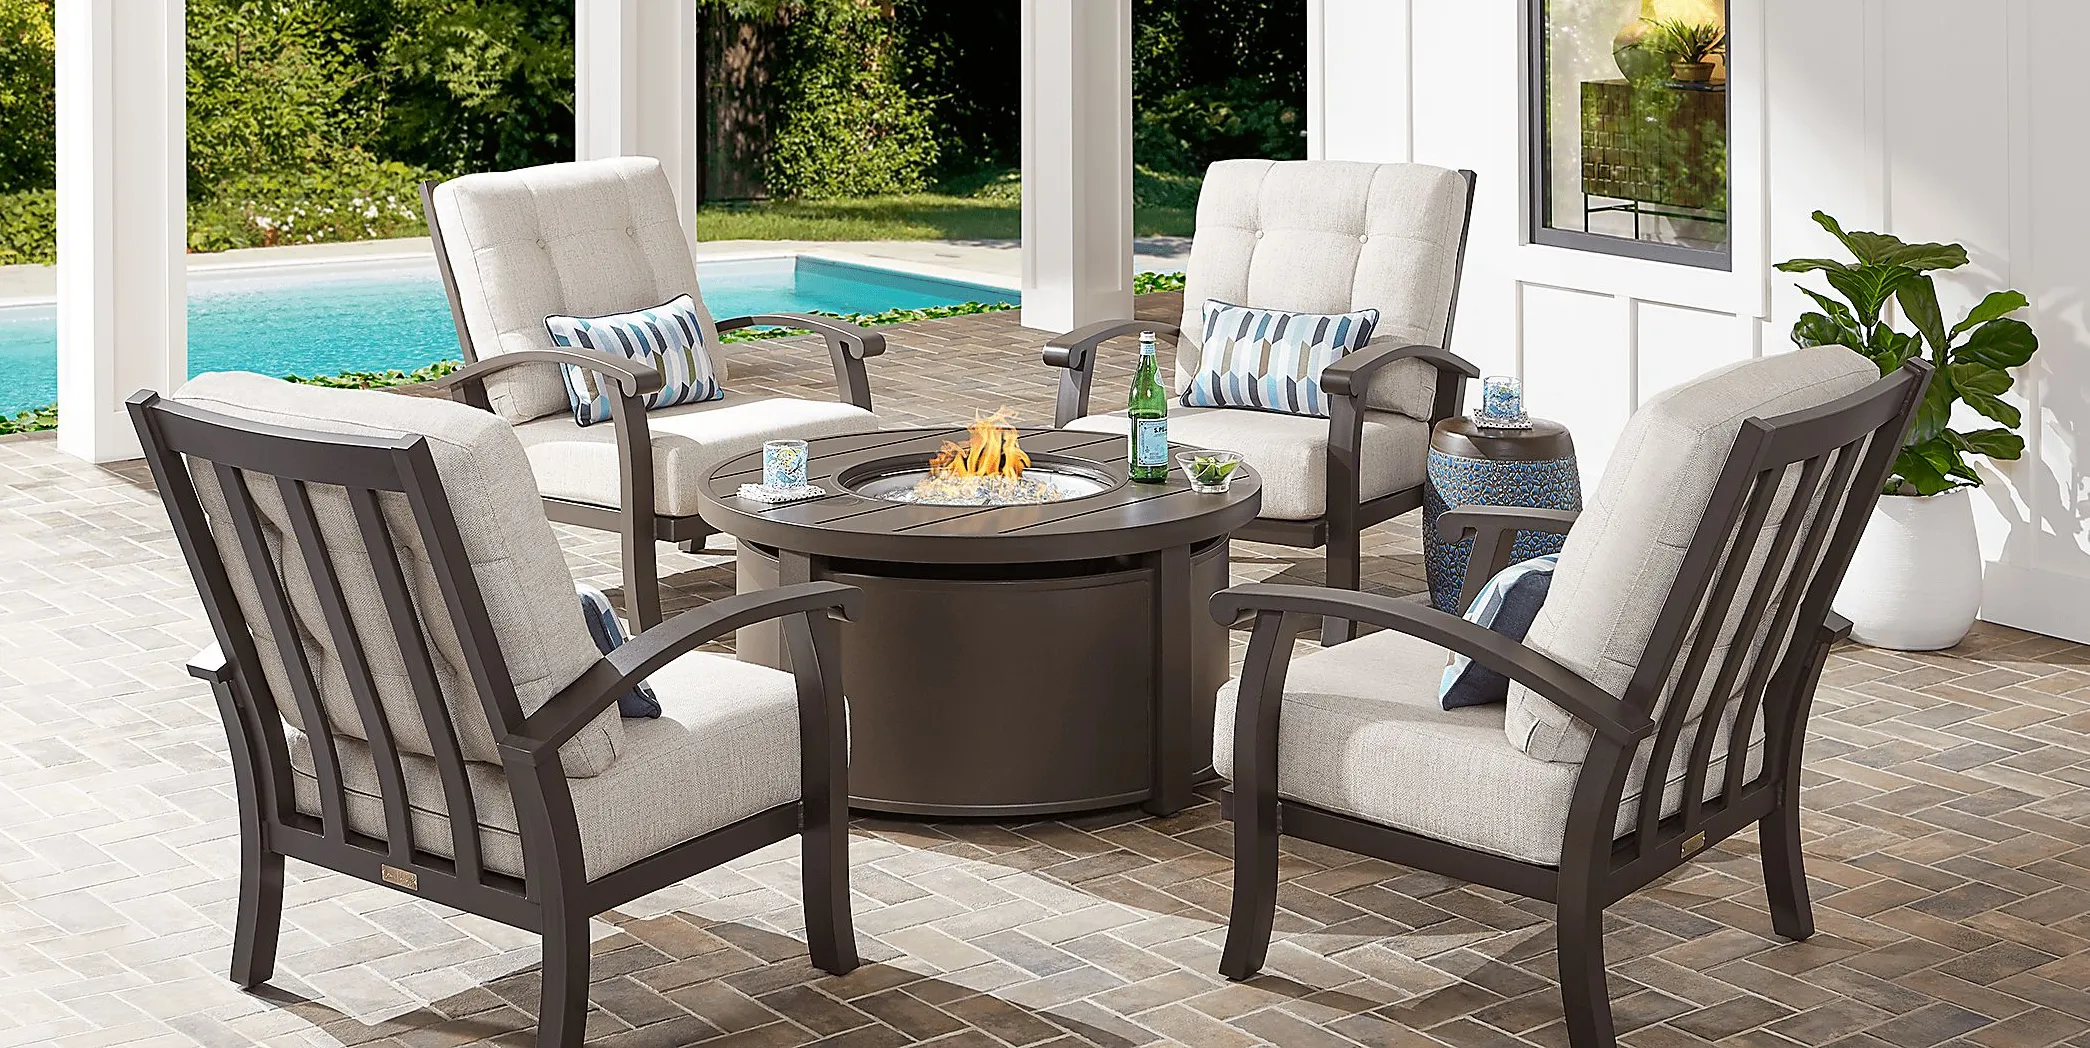 Lake Breeze Aged Bronze 5 Pc Outdoor Fire Pit Seating Set with Parchment Cushions